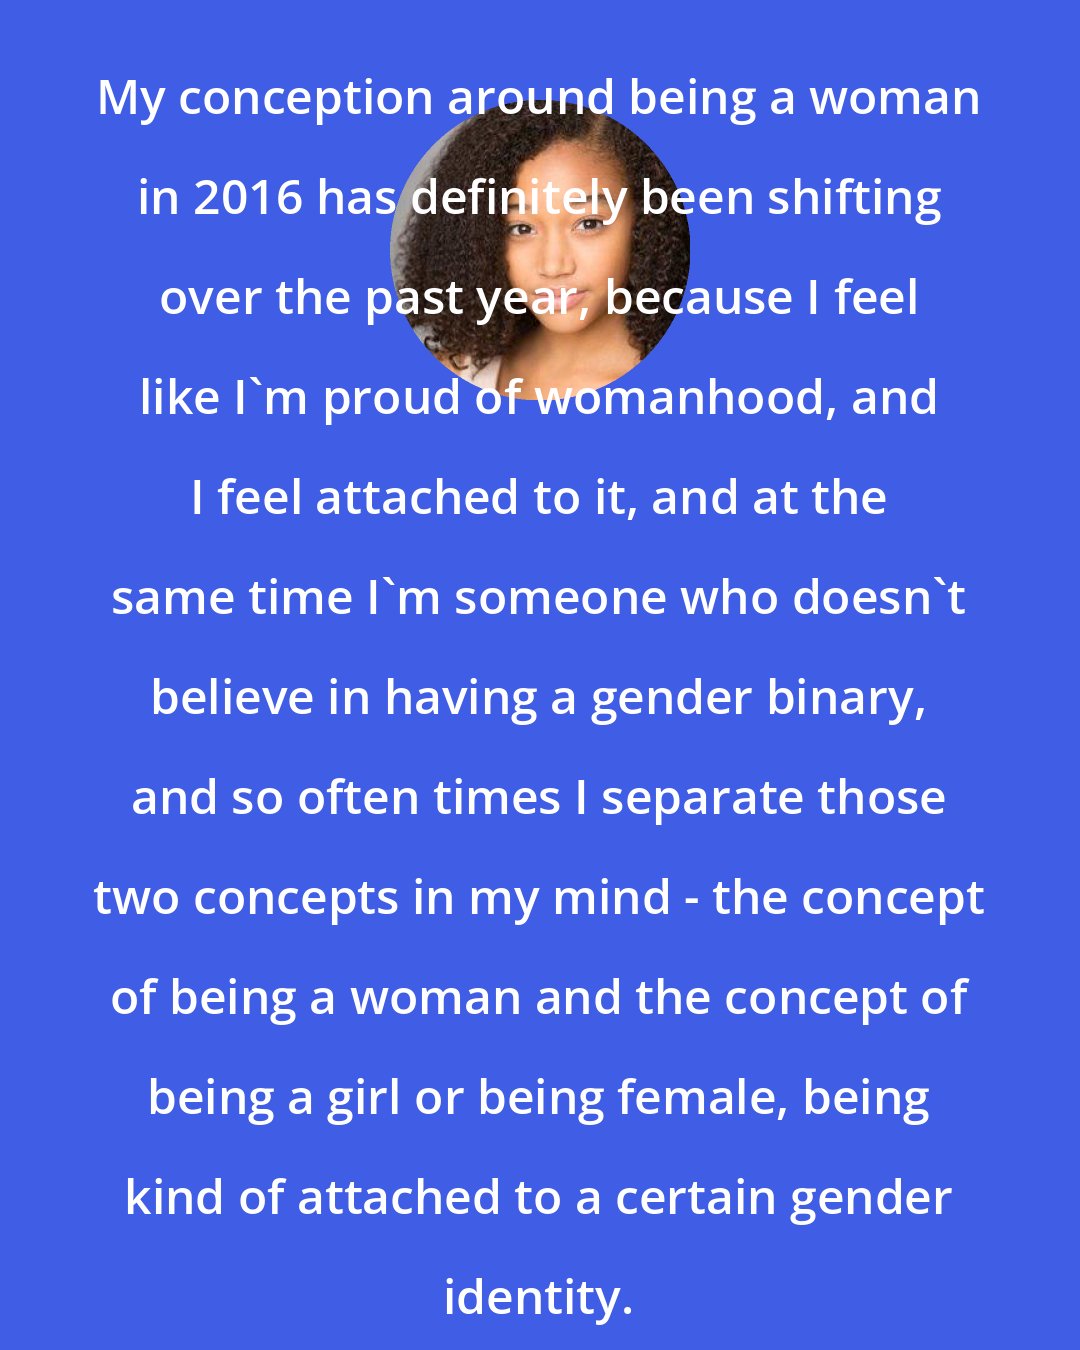 Amandla Stenberg: My conception around being a woman in 2016 has definitely been shifting over the past year, because I feel like I'm proud of womanhood, and I feel attached to it, and at the same time I'm someone who doesn't believe in having a gender binary, and so often times I separate those two concepts in my mind - the concept of being a woman and the concept of being a girl or being female, being kind of attached to a certain gender identity.